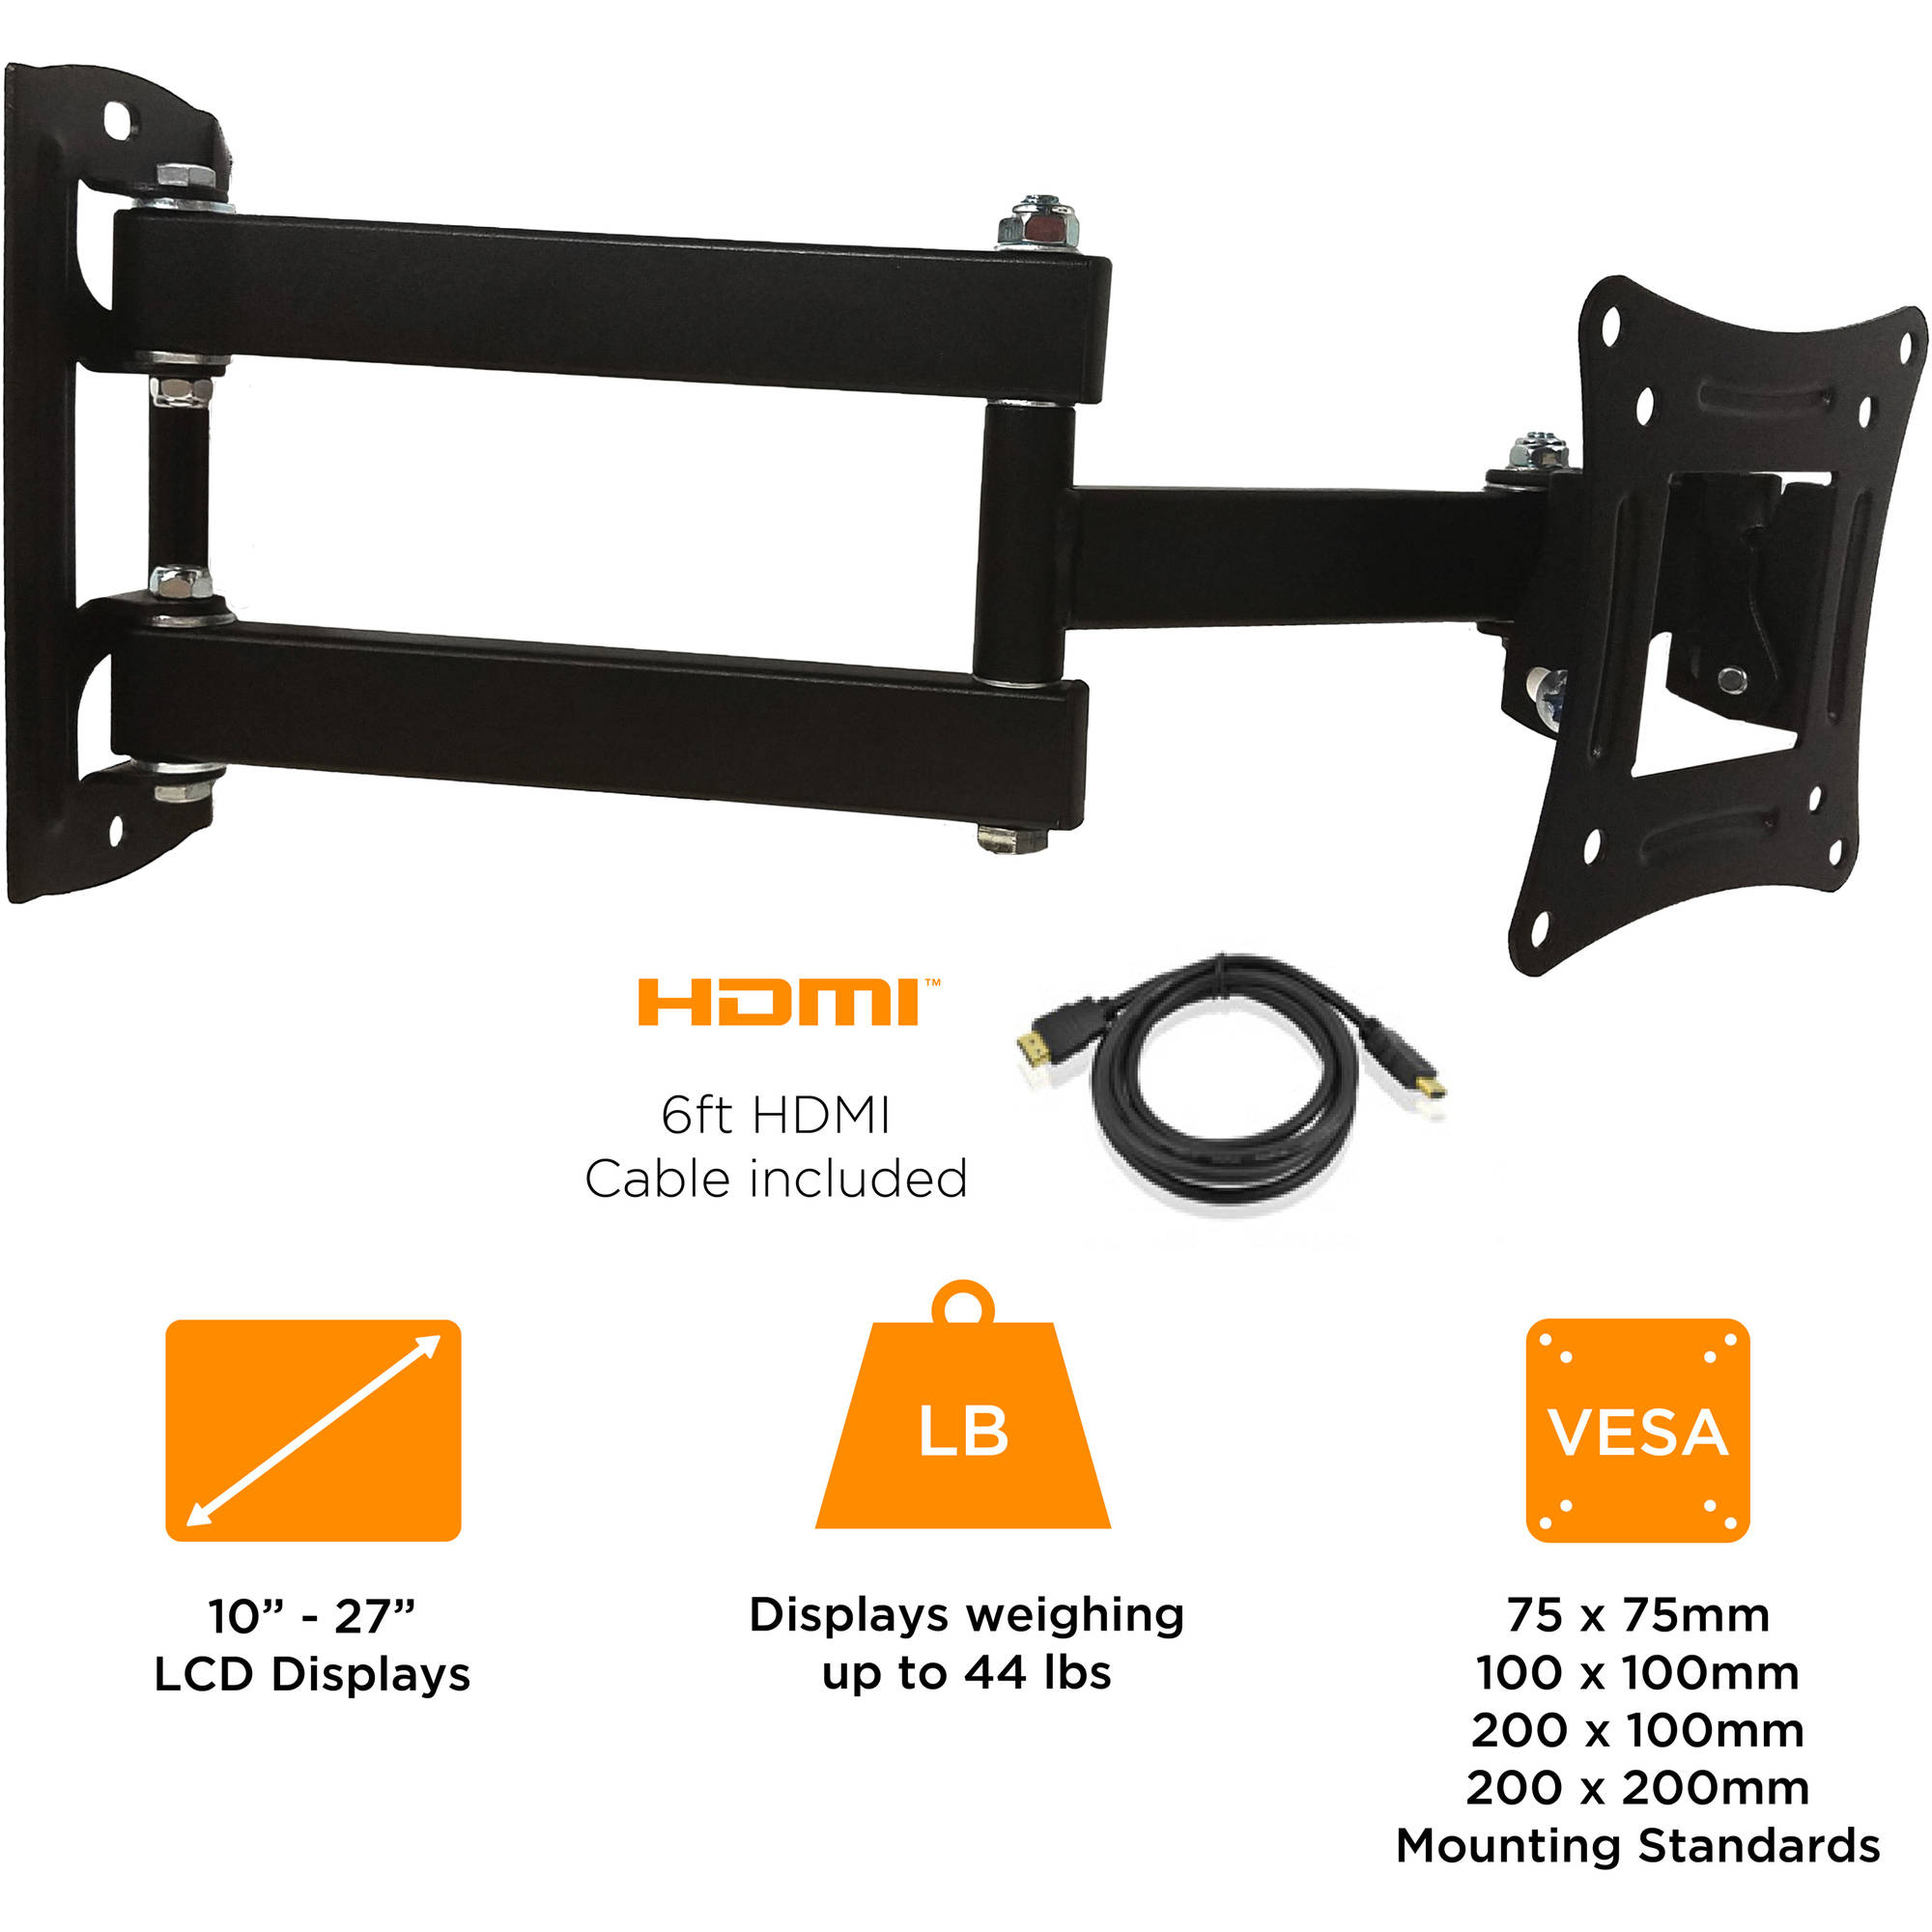 Ematic TV Wall Mount Kit for 10"-27" TVs up to 44 Pounds with HDMI Cable EMW2301 - image 2 of 6